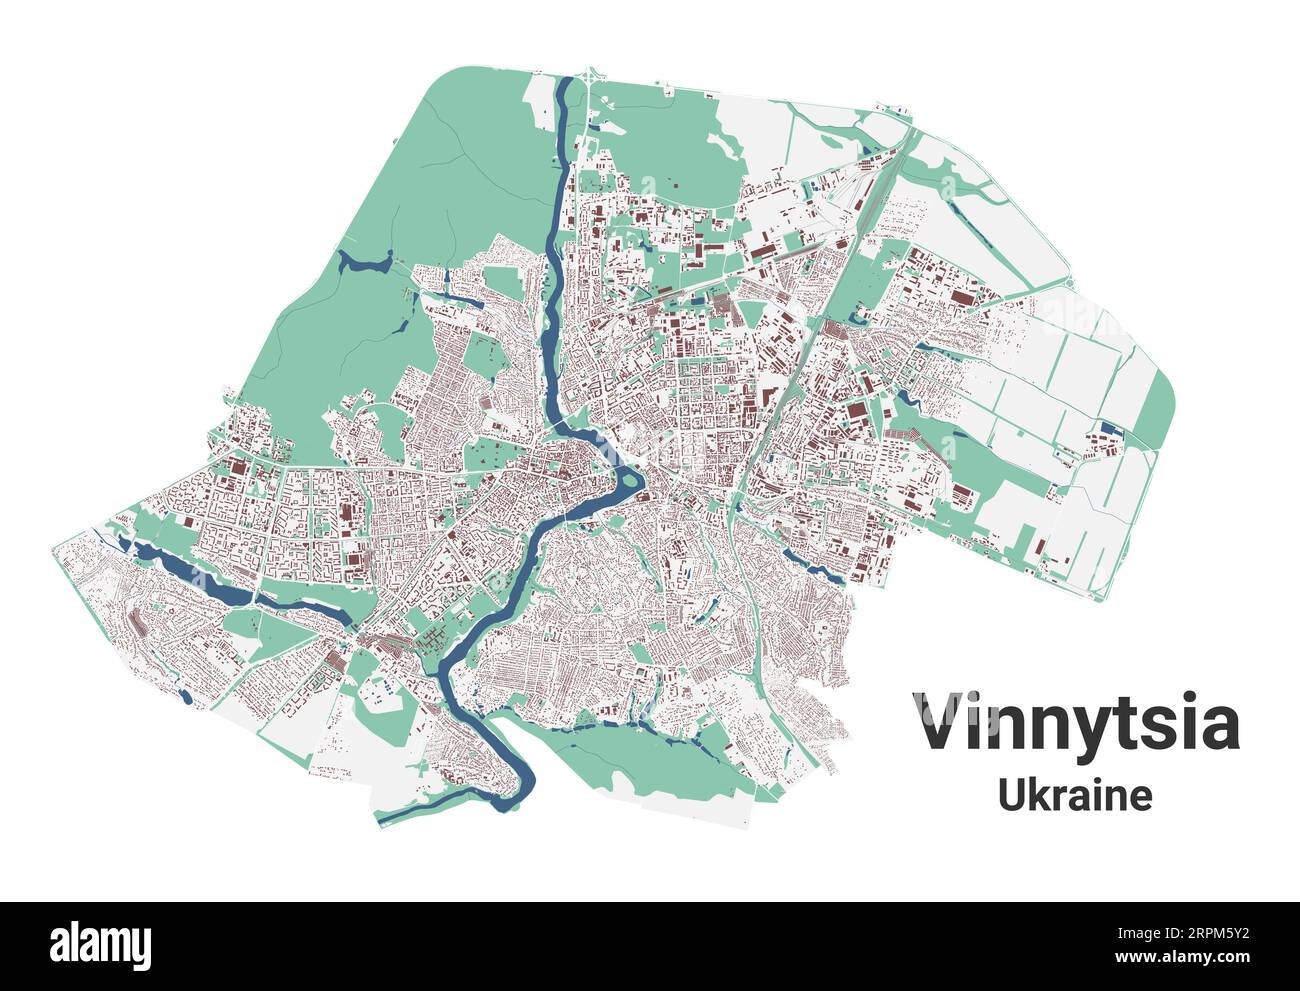 Vinnytsia map, city in Ukraine. Municipal administrative area map with buildings, rivers and roads, parks and railways. Vector illustration. Stock Vector